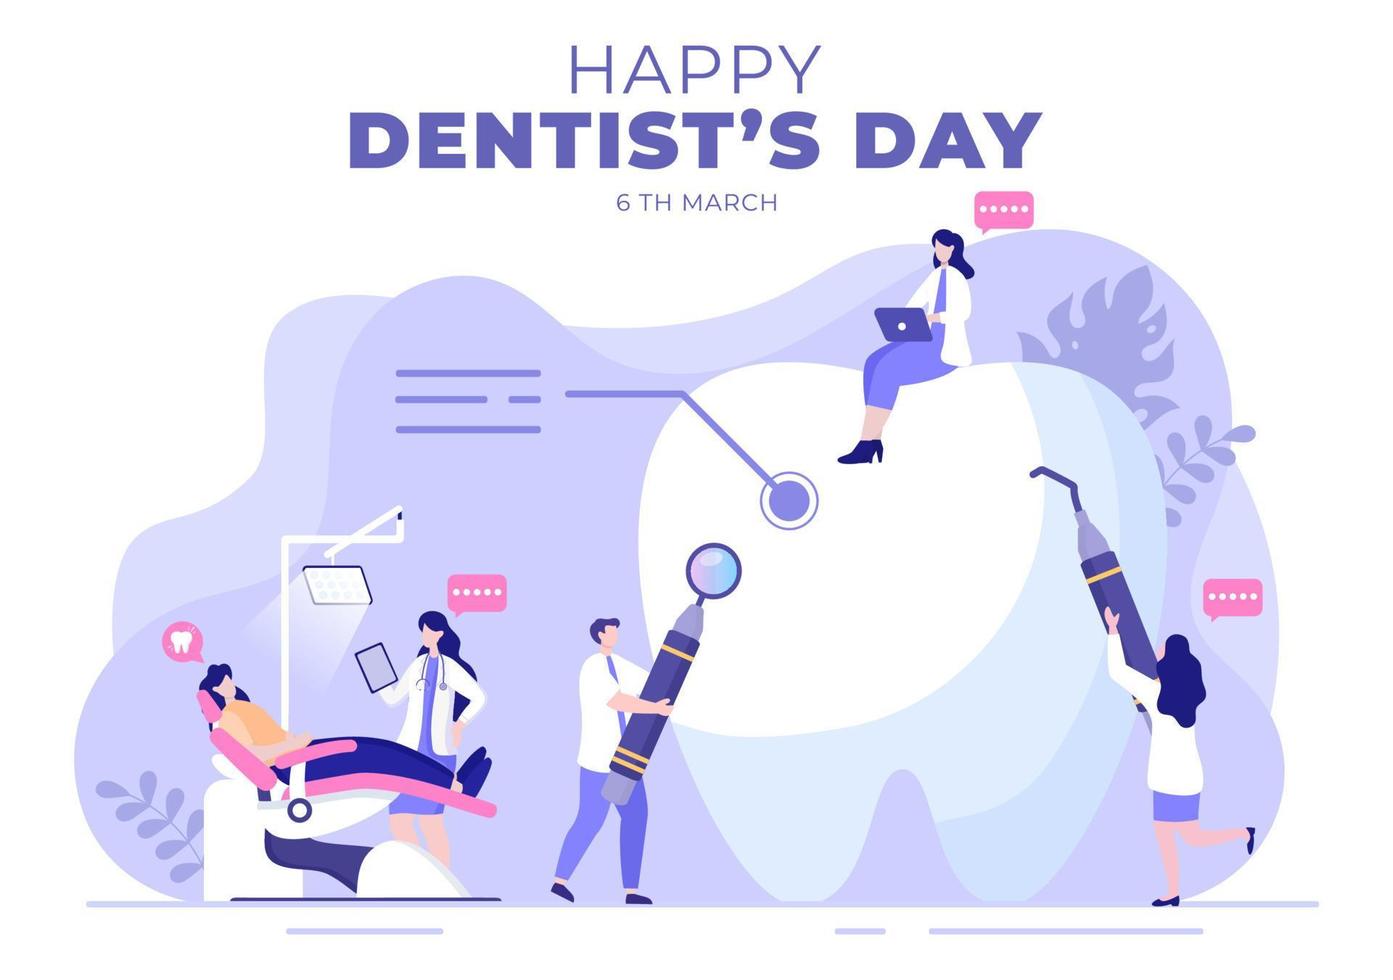 World Dentist Day with Tooth and Dentistry to Prevent Cavities and Healthcare in Flat Cartoon Background Illustration Suitable for Poster or Banner vector